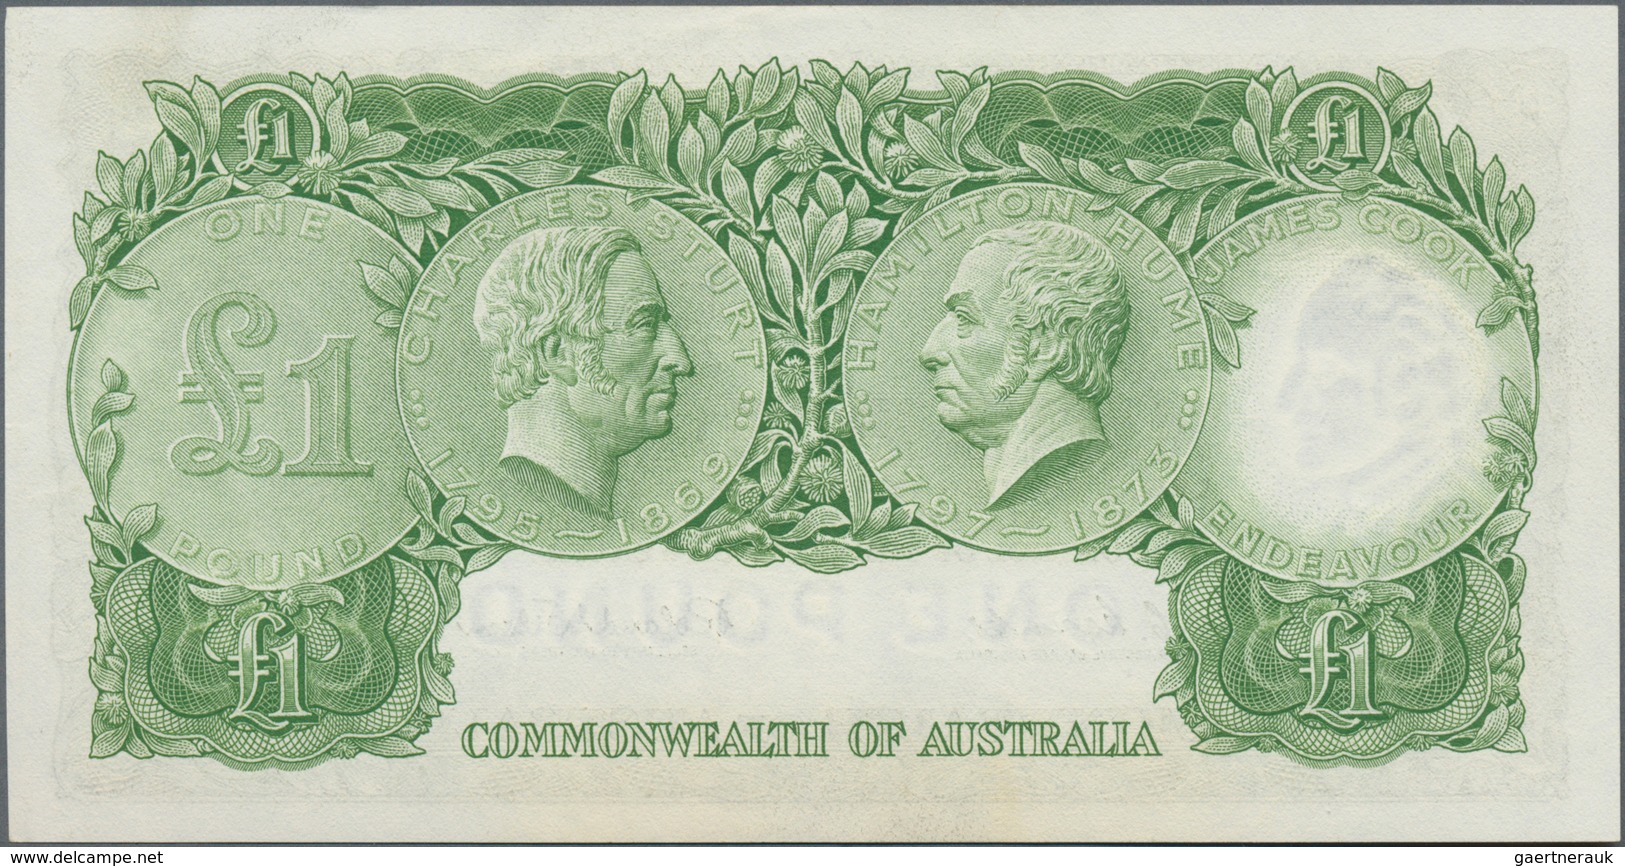 Australia / Australien: Very nice set with 4 banknotes comprising 1 Pound ND(1953-60) Commonwealth o